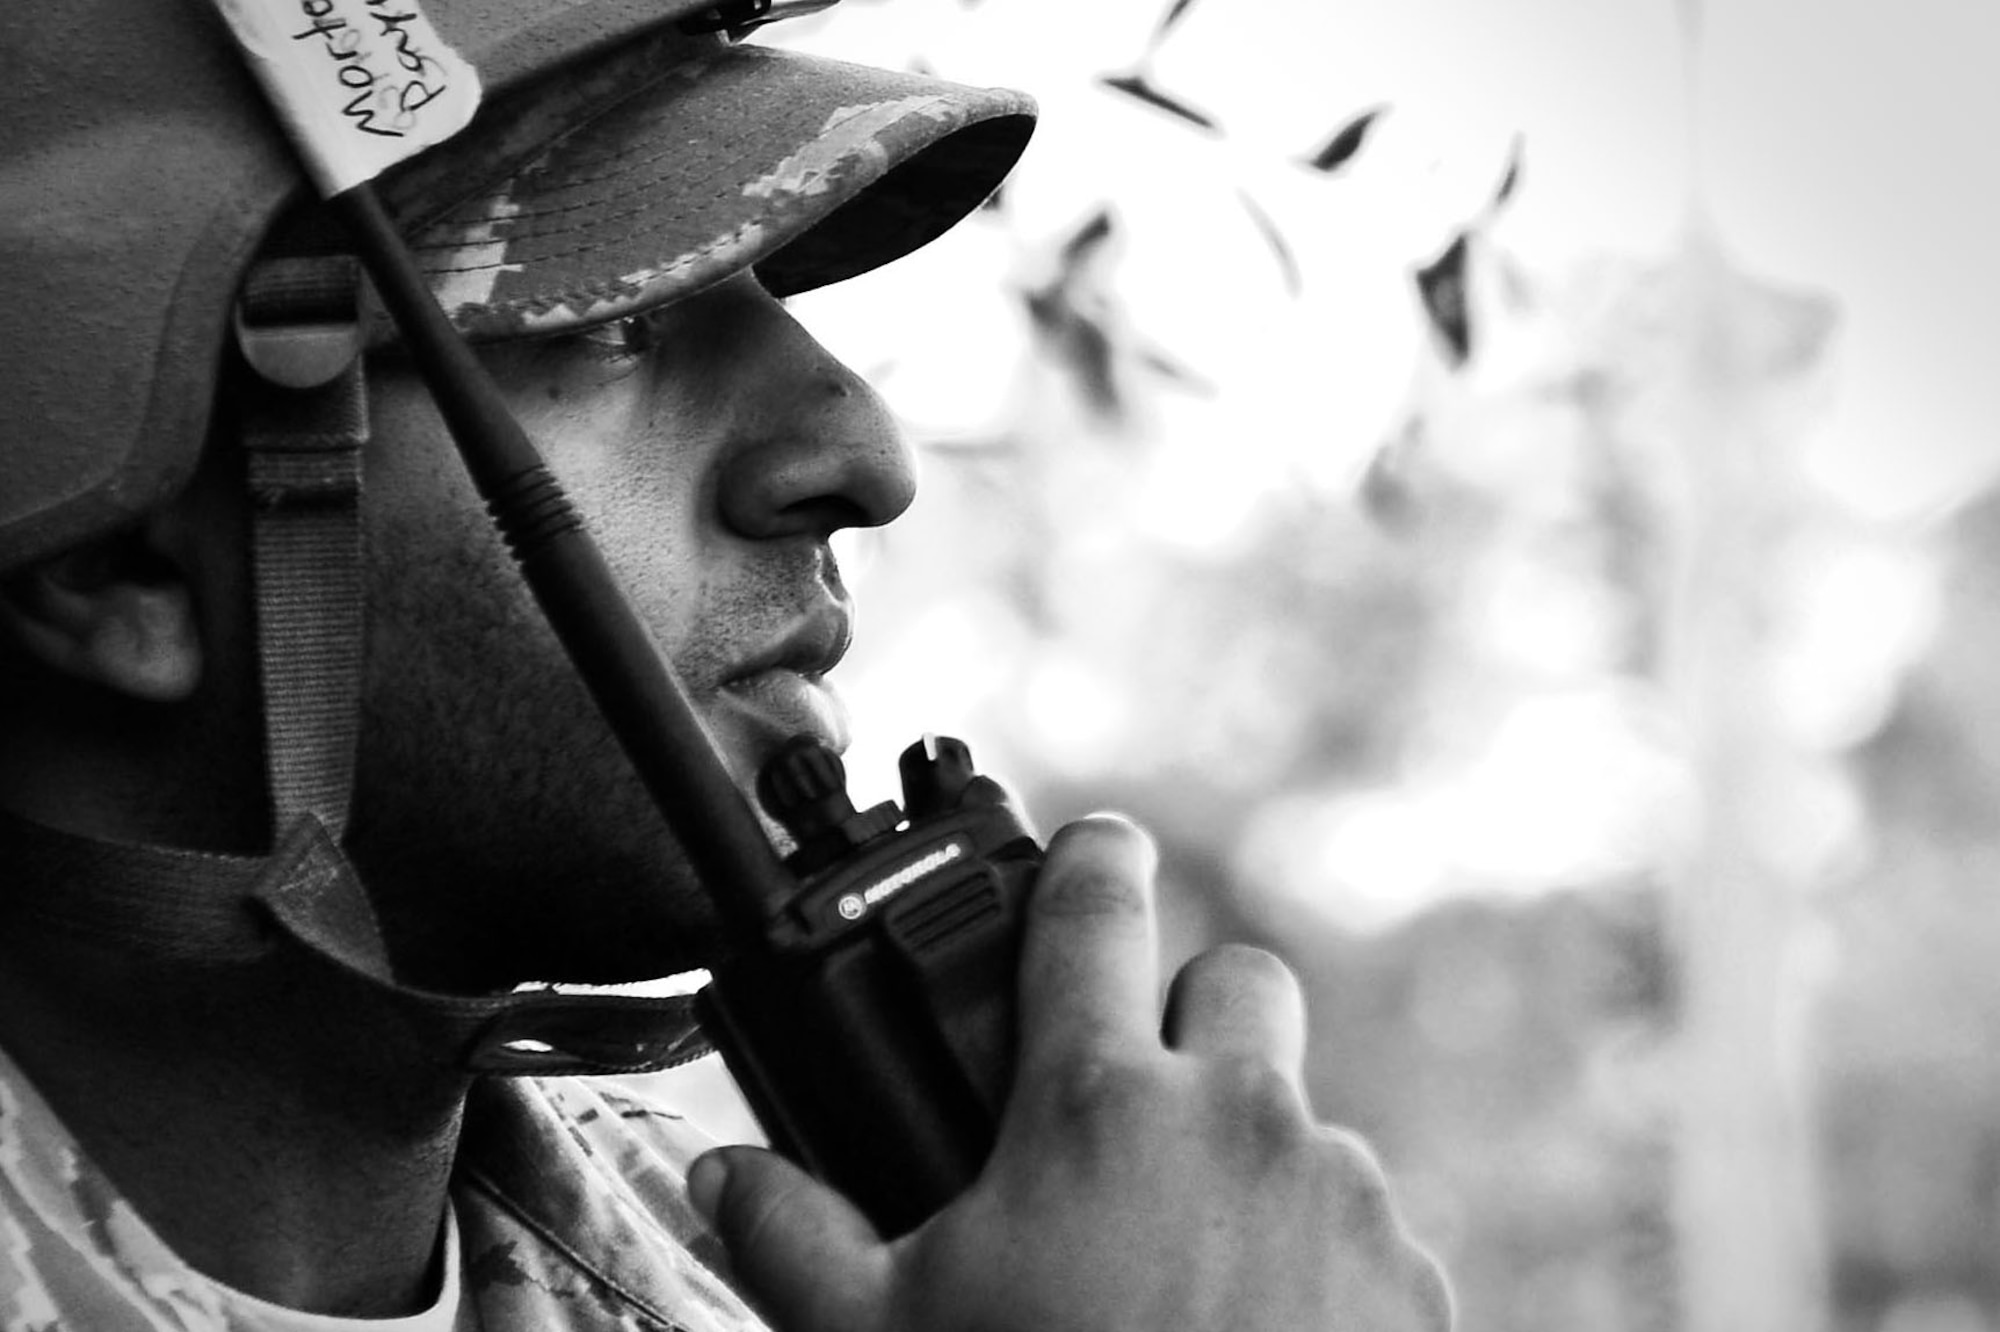 U.S. Air Force Staff Sgt. Michael Payne, 20th Civil Engineer Squadron construction management technician, talks on a radio during operational readiness exercise Weasel Victory 17-07 at Poinsett Electronic Combat Range, near Wedgefield, S.C., May 16, 2017. Various Airmen across the Poinsett site utilized radios to receive information on simulated attacks or condition changes throughout the three-day, 72-hour exercise. (U.S. Air Force photo by Airman 1st Class Christopher Maldonado)